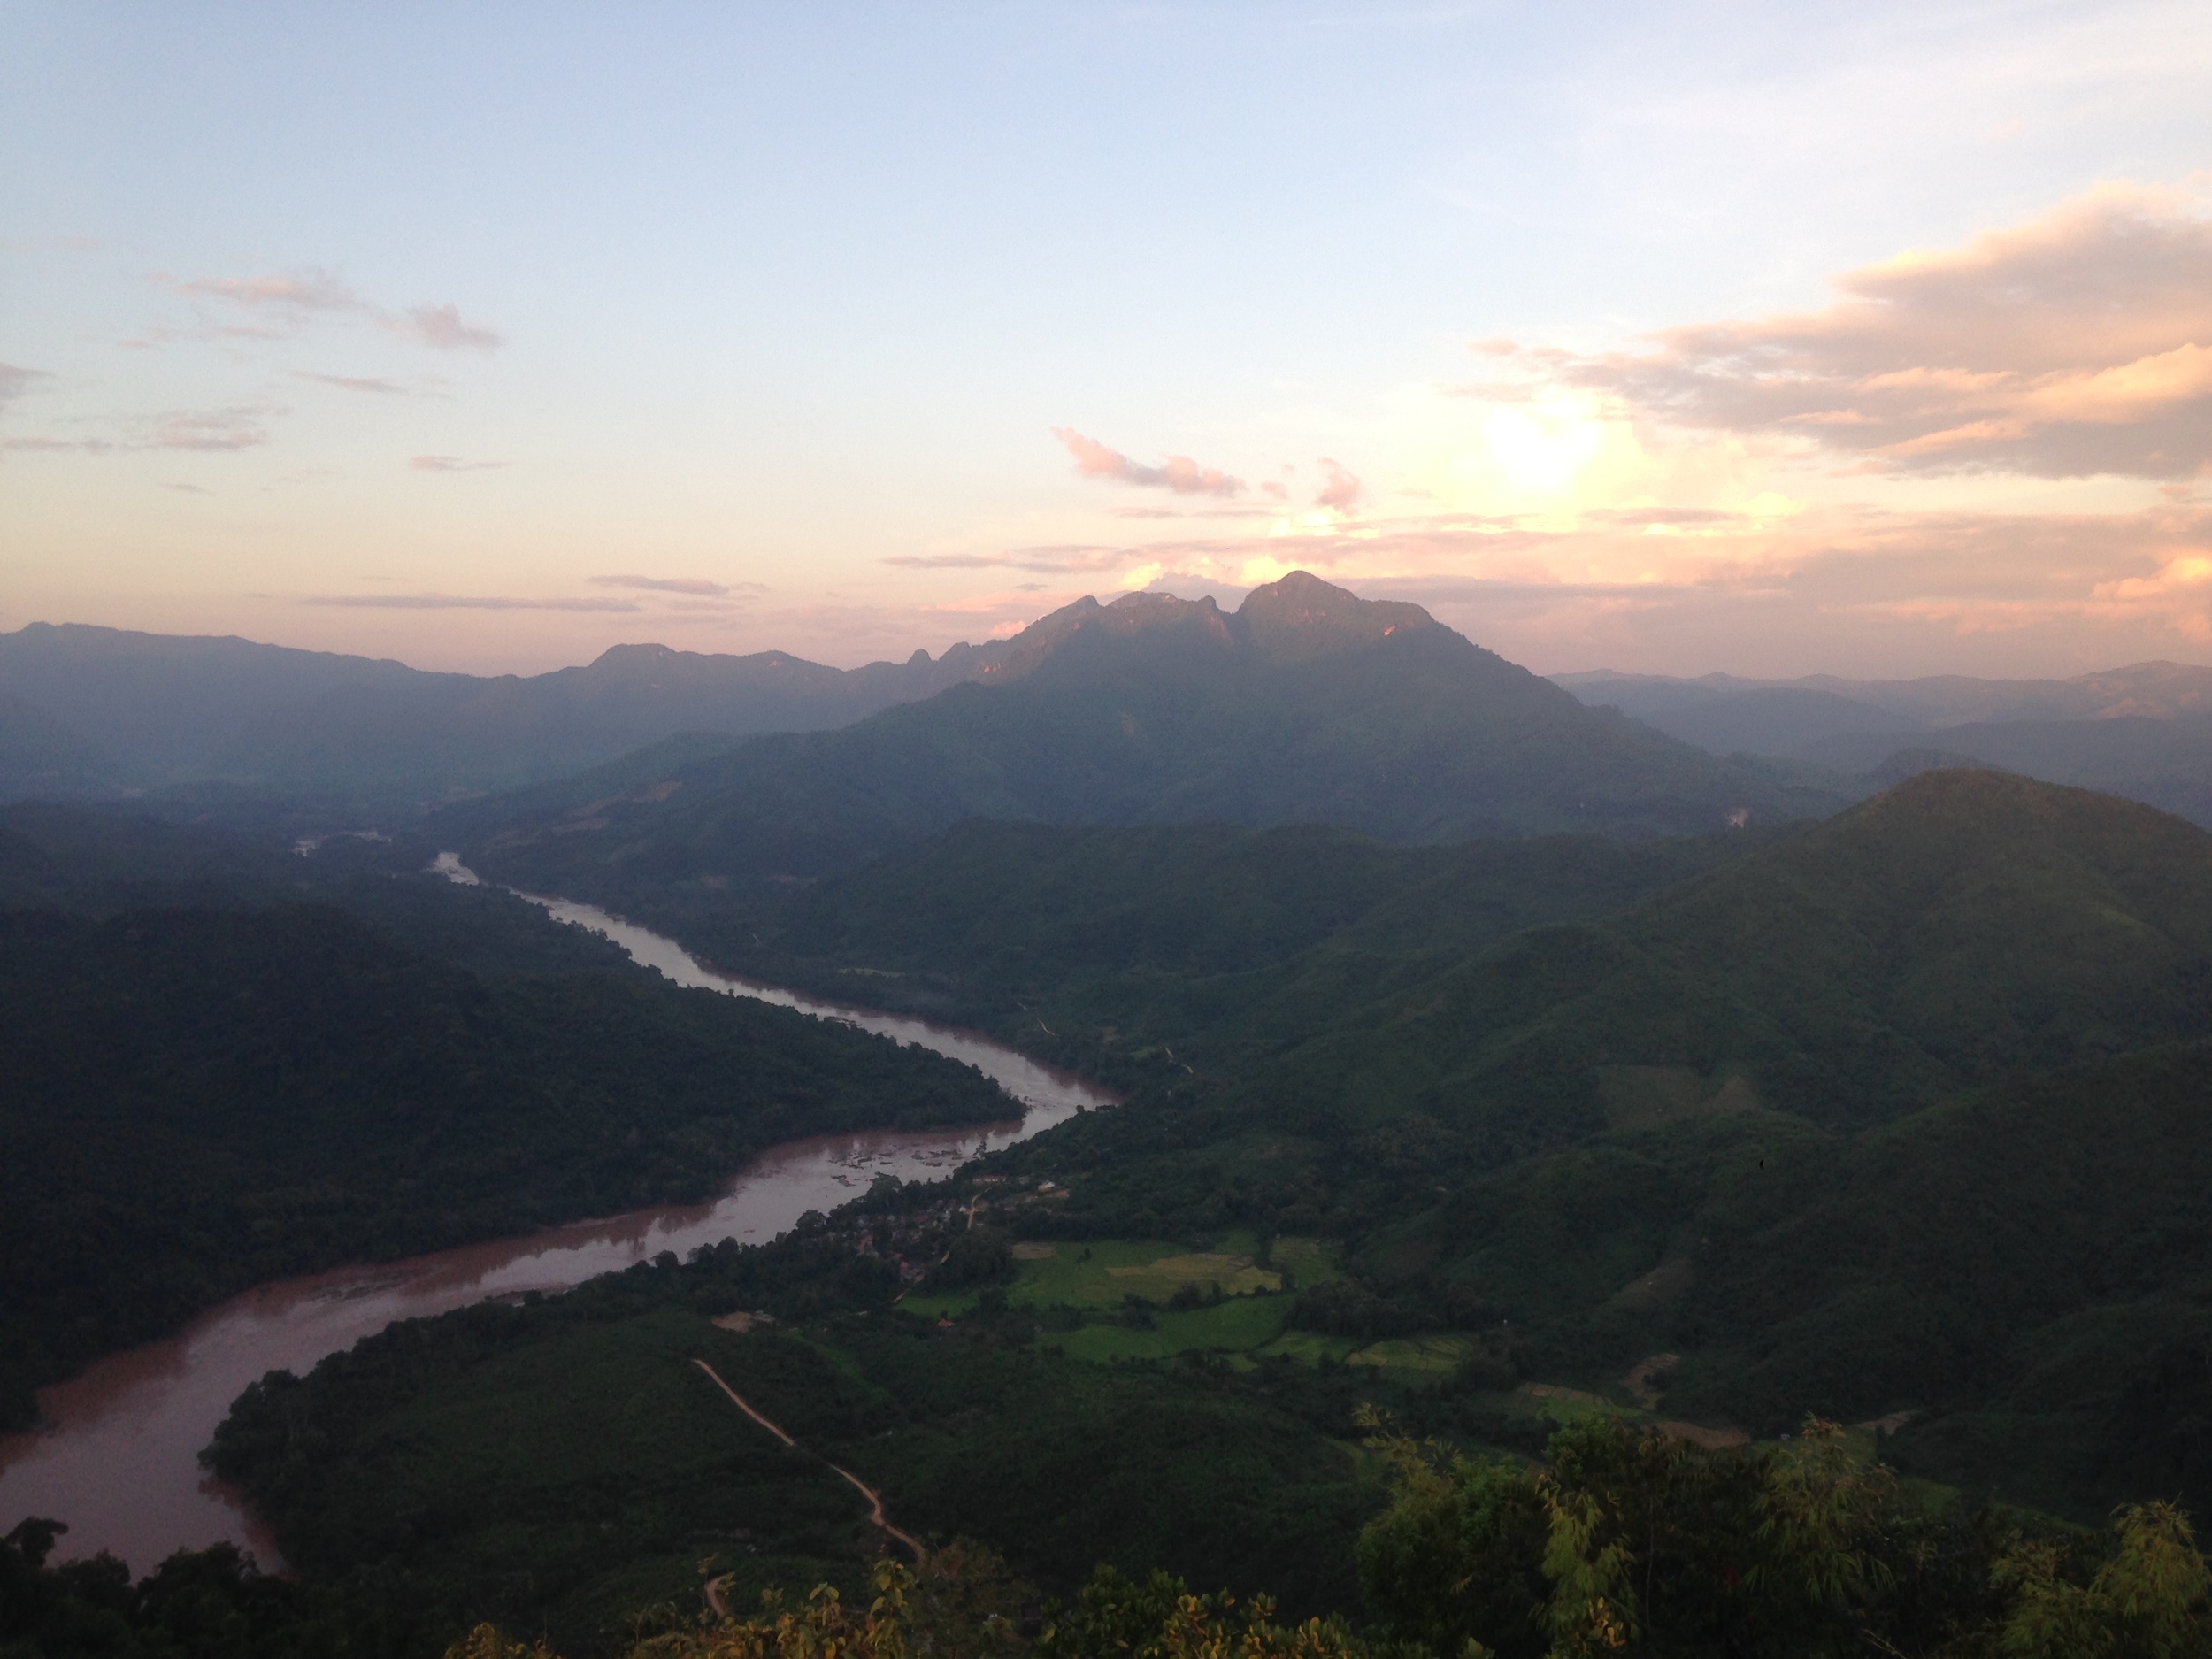  The view from The Viewpoint in Nong Khiaw 